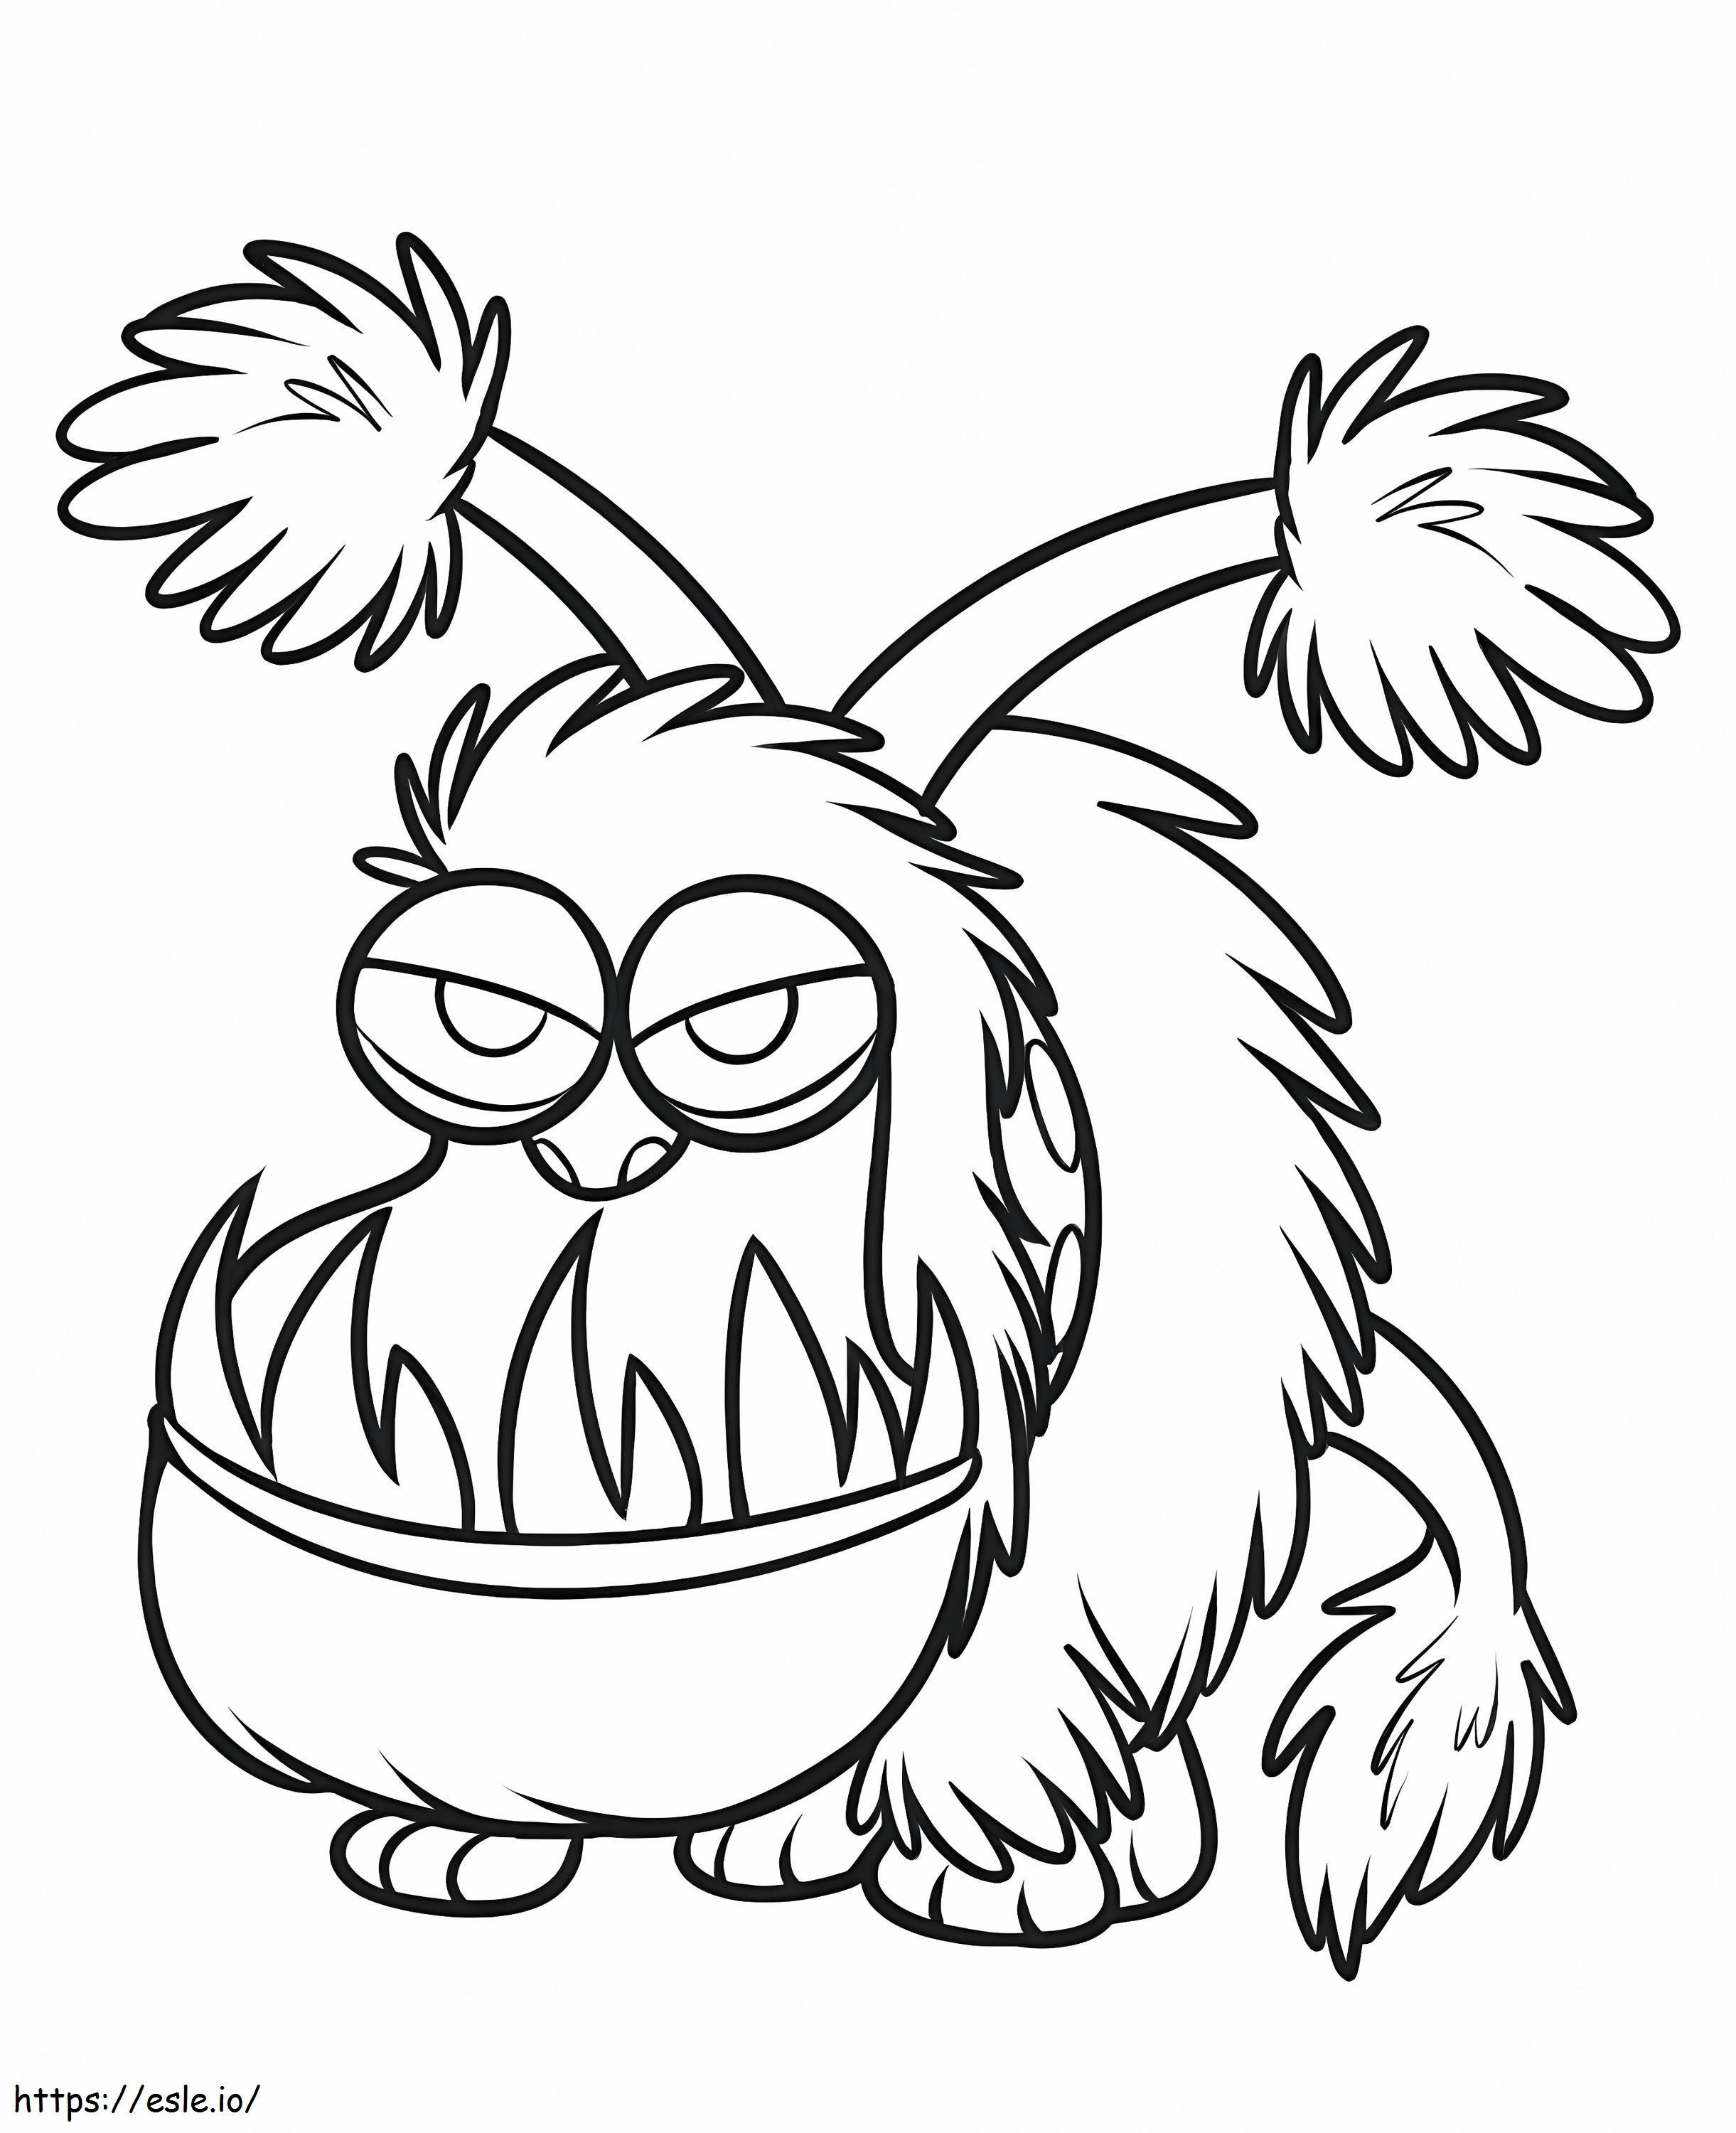 Despicable Monster coloring page